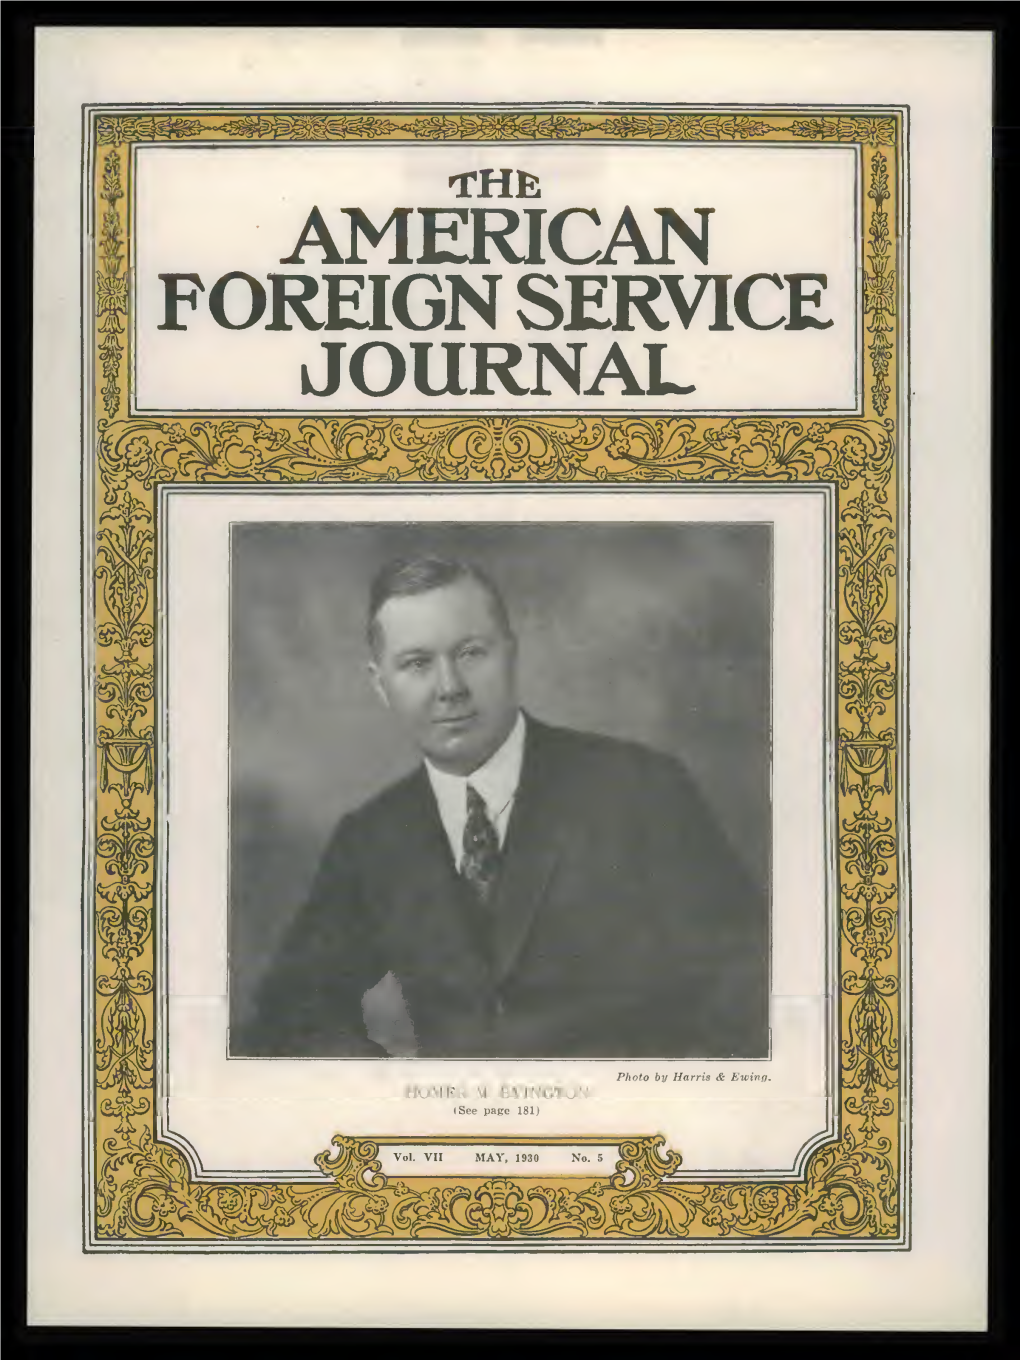 The Foreign Service Journal, May 1930